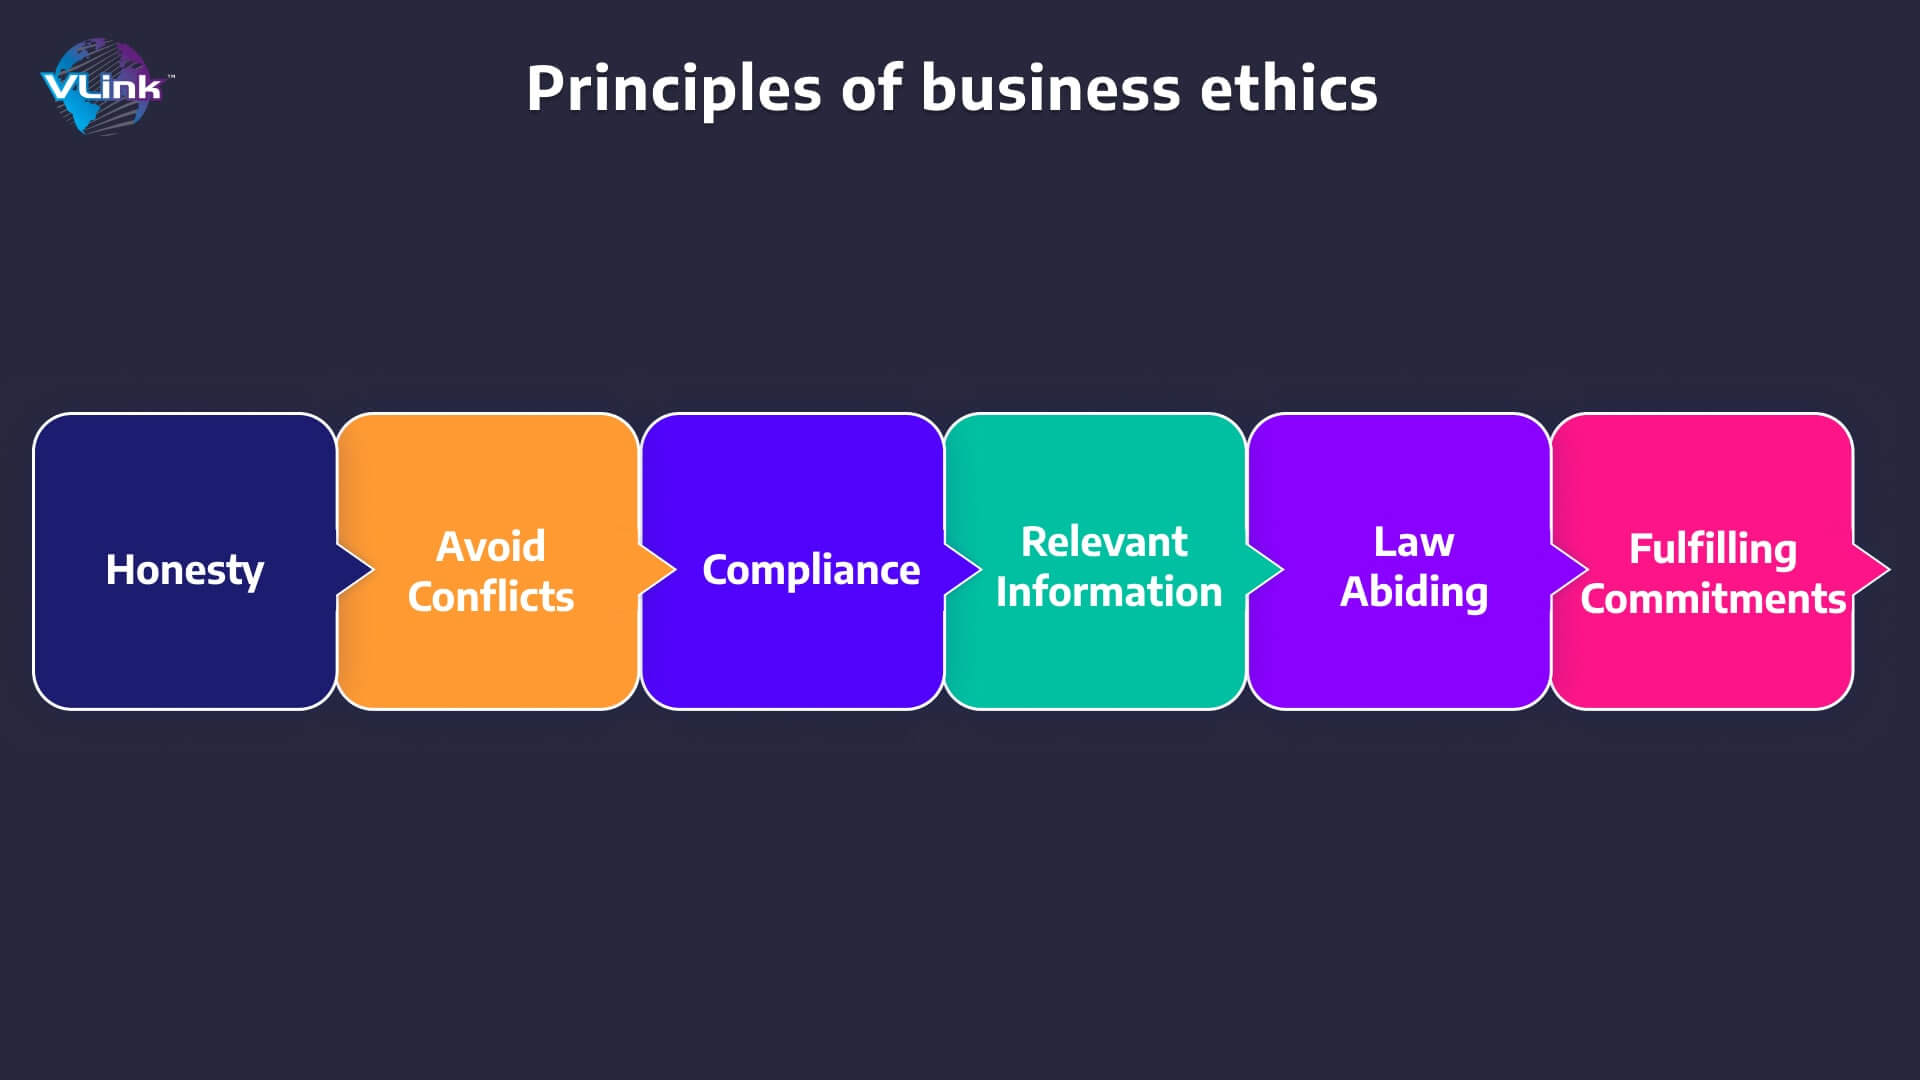 Principles of business ethics